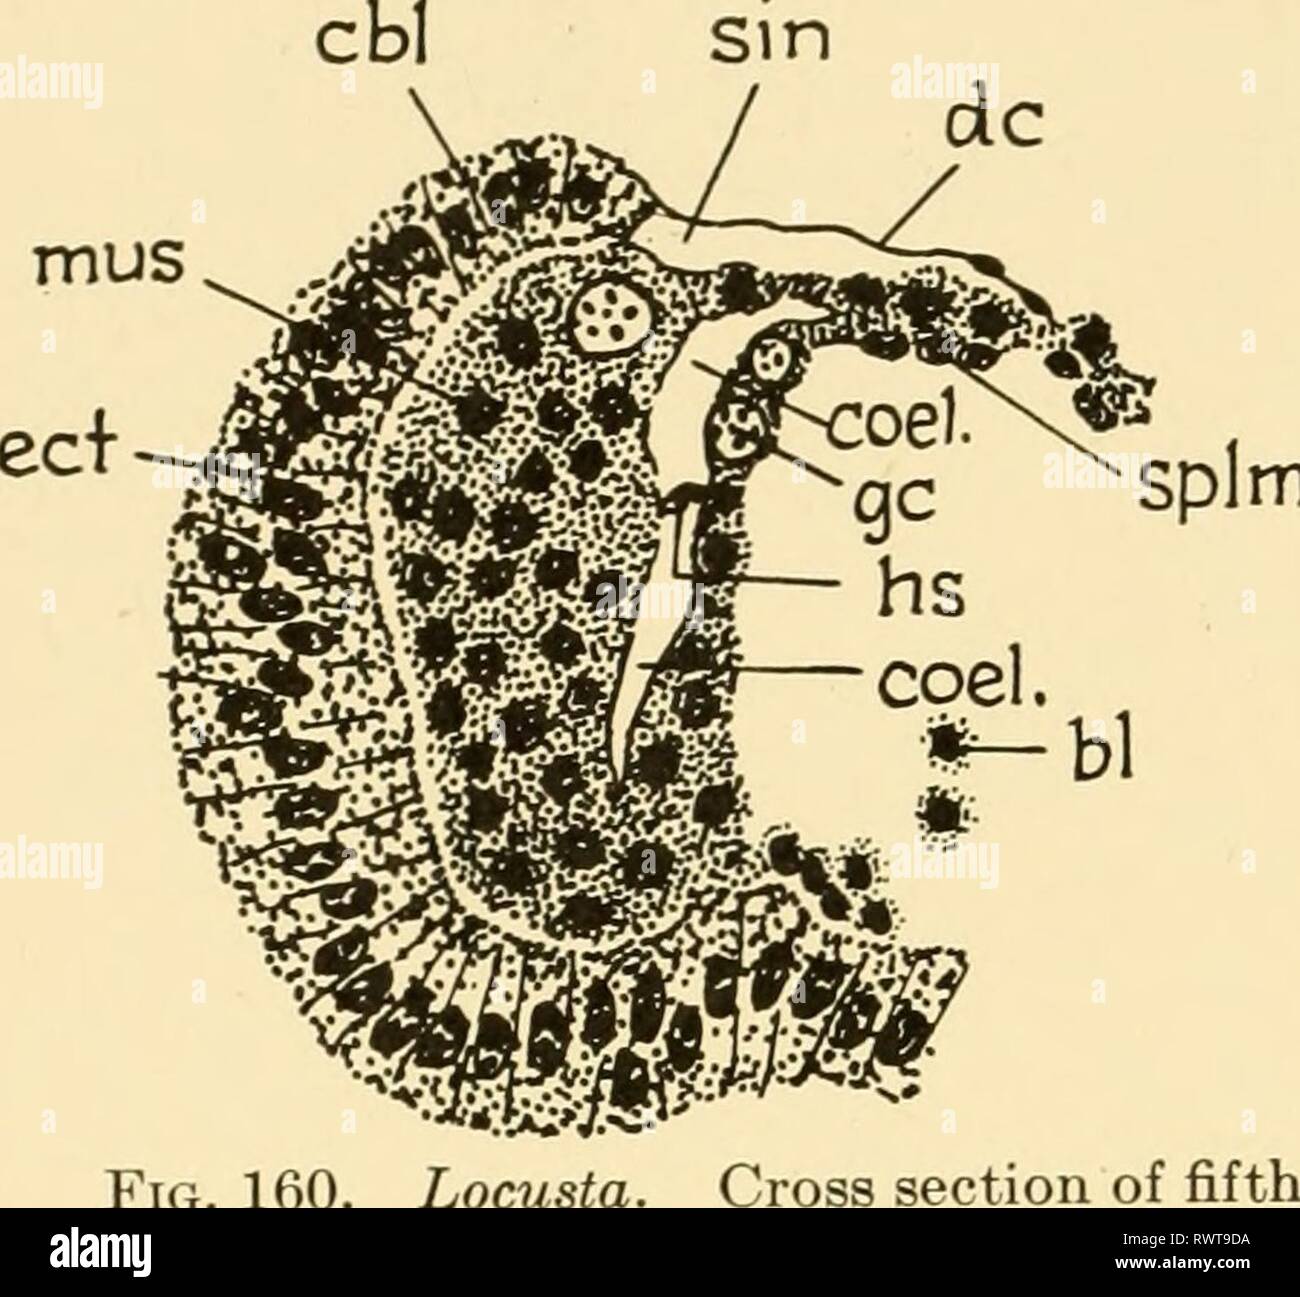 Embryology of insects and myriapods; Embryology of insects and myriapods; the developmental history of insects, centipedes, and millepedes from egg desposition [!] to hatching embryologyofinse00joha Year: 1941  238 EMBRYOLOGY OF INSECTS AND MYRIAPODS splm    a pair of deep medially directed invaginations arises just behind the mandi- bles which fuse with the T-shaped invaginations to form the tentorium. The dorsal tentorial arms arise afterward as outgrowths from the anterior tentorial arms. The mandibular apodemes arise at the 90-hour stage as a pair of deep invagina- tions near the middle of Stock Photo